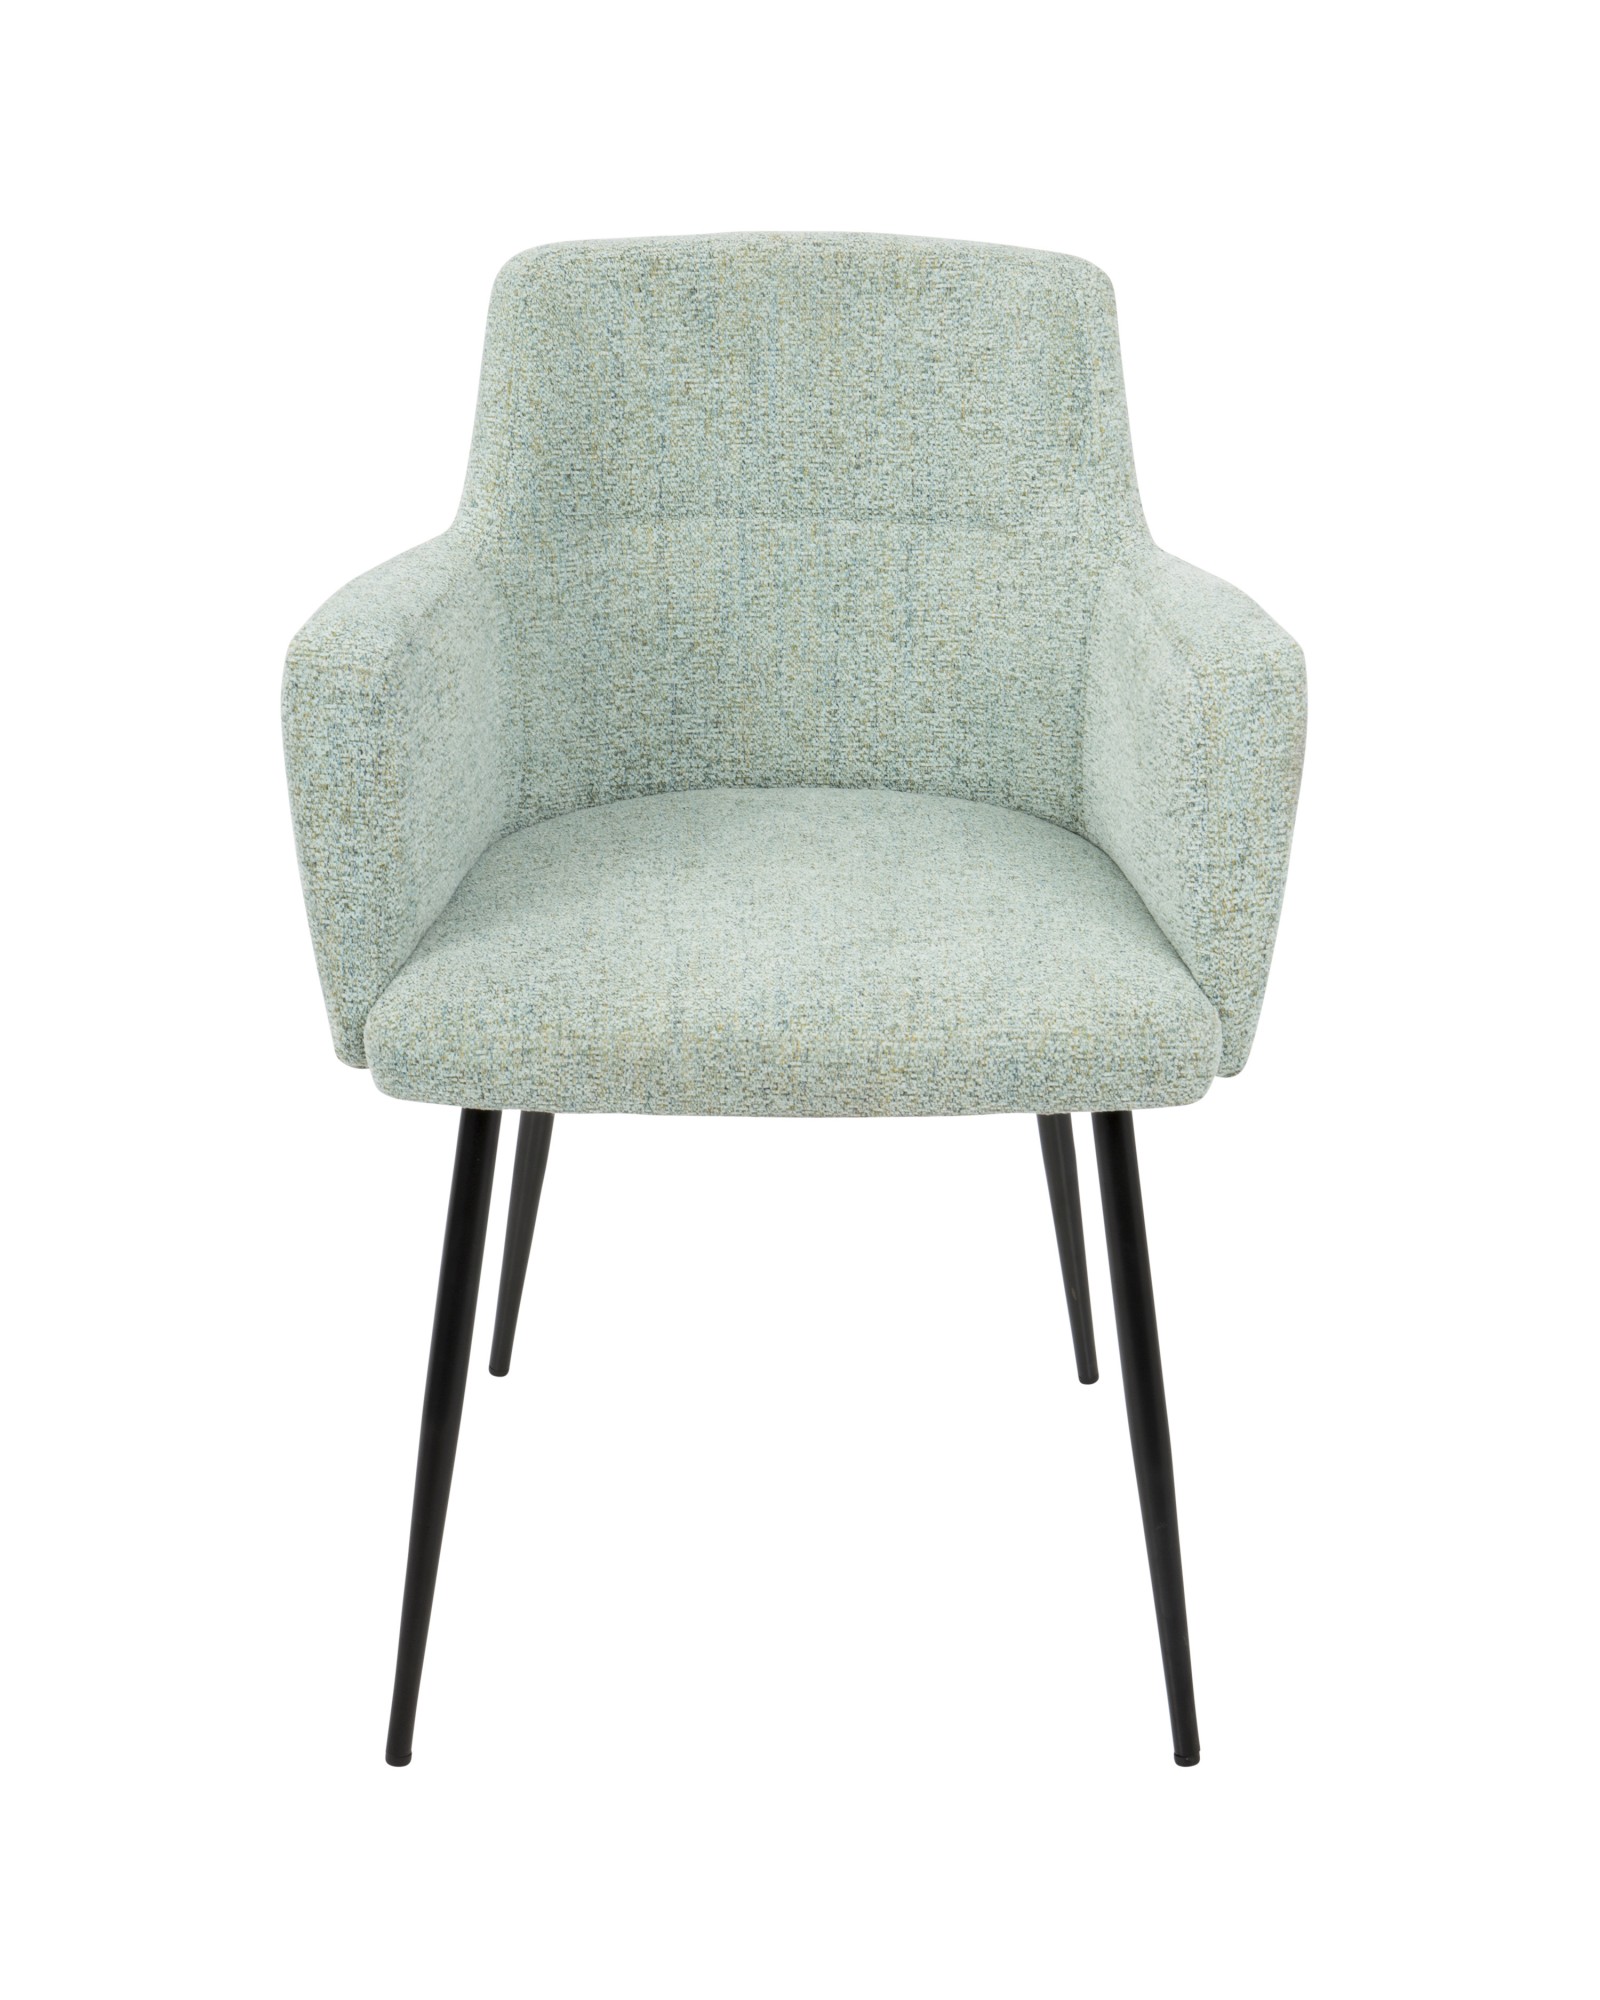 Andrew Contemporary Dining/Accent Chair in Black with Seafoam Green Fabric - Set of 2